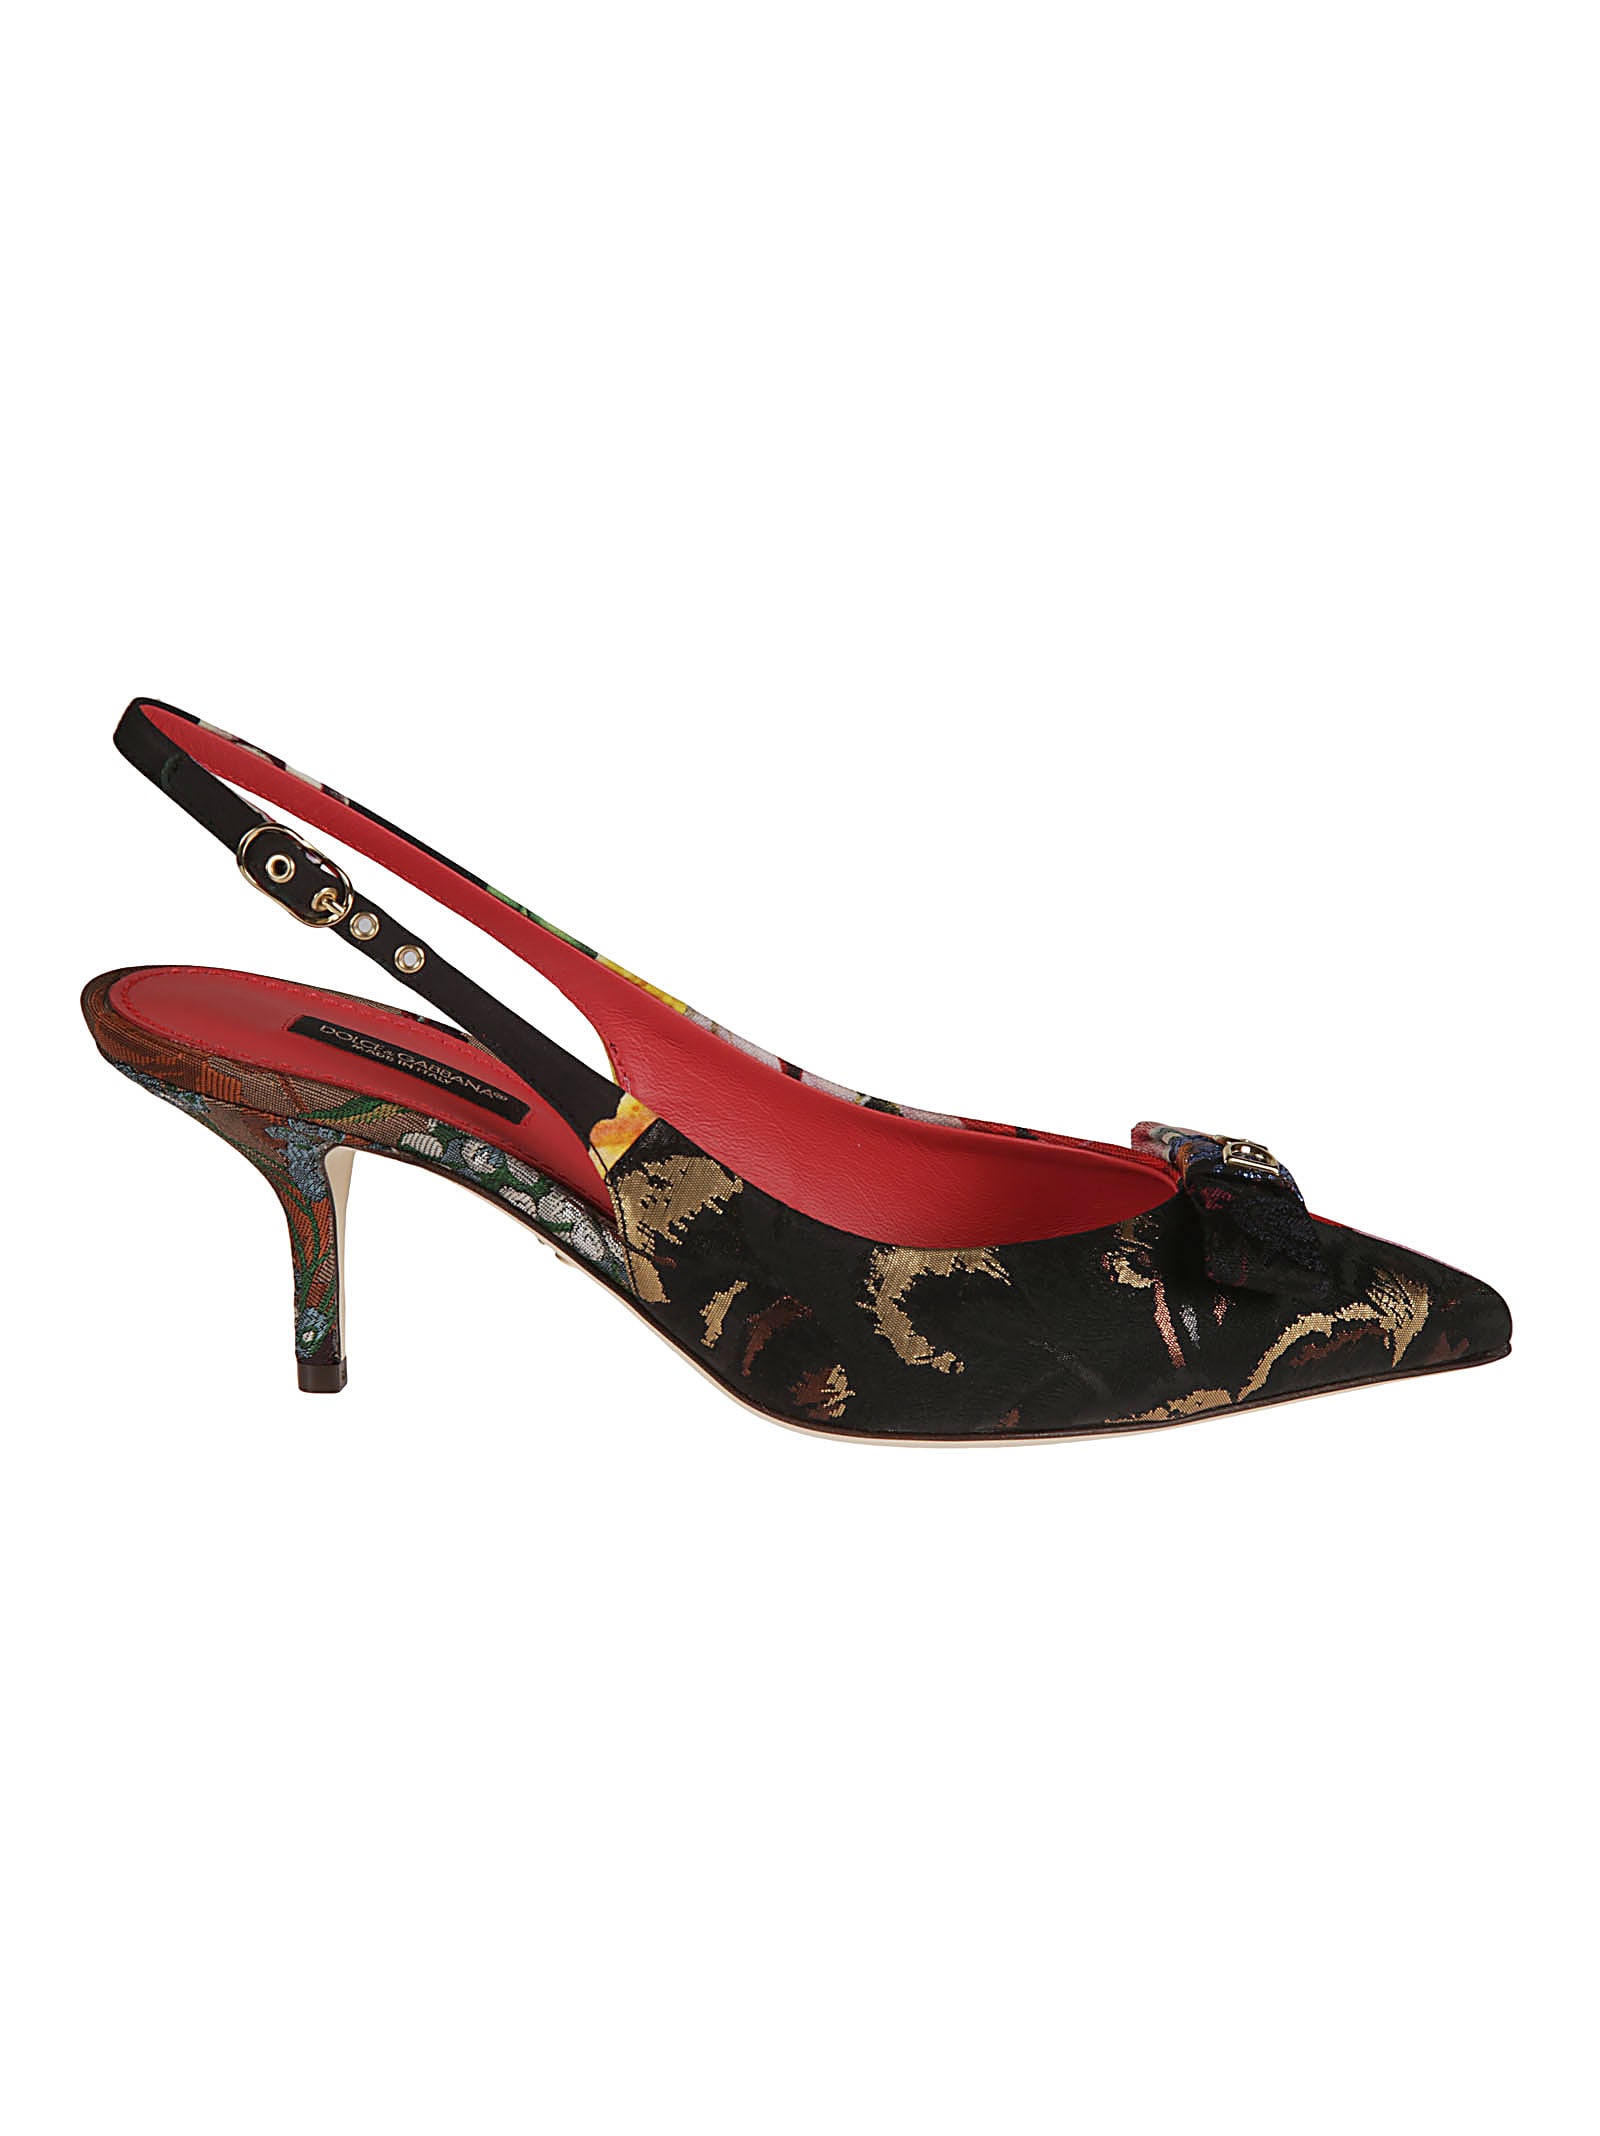 Buy Dolce & Gabbana Buckle Sided Slingback Logo Pumps online, shop Dolce & Gabbana shoes with free shipping